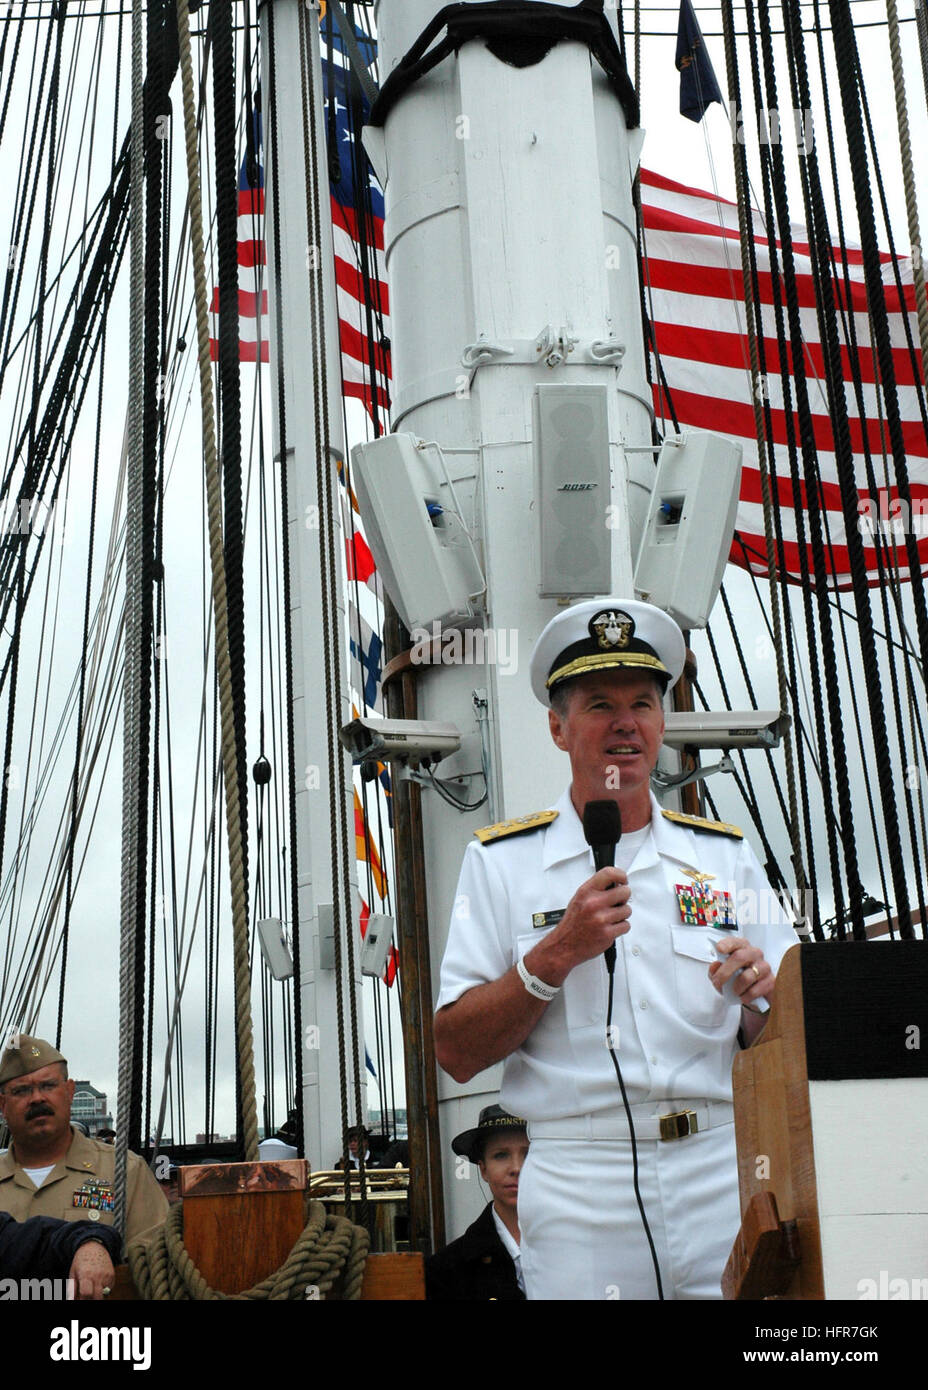 060610-N-5322S-004 Boston (June 10, 2006) Ð Commander, U.S. 2nd Fleet, Vice Adm. Mark Fitzgerald, addresses the crowd on USS Constitution's Military Appreciation Day turnaround cruise. The turn-around cruise is one of the high points of Boston Navy Week. Twenty-four such weeks are planned this year in cities throughout the U.S., arranged by the Navy Office of Community Outreach (NAVCO). NAVCO is tasked with enhancing the Navy's brand image in areas with limited exposure to the Navy. U.S. Navy photo by Seaman Michelle Sowers (RELEASED) US Navy 060610-N-5322S-004 Commander, U.S. 2nd Fleet, Vice  Stock Photo